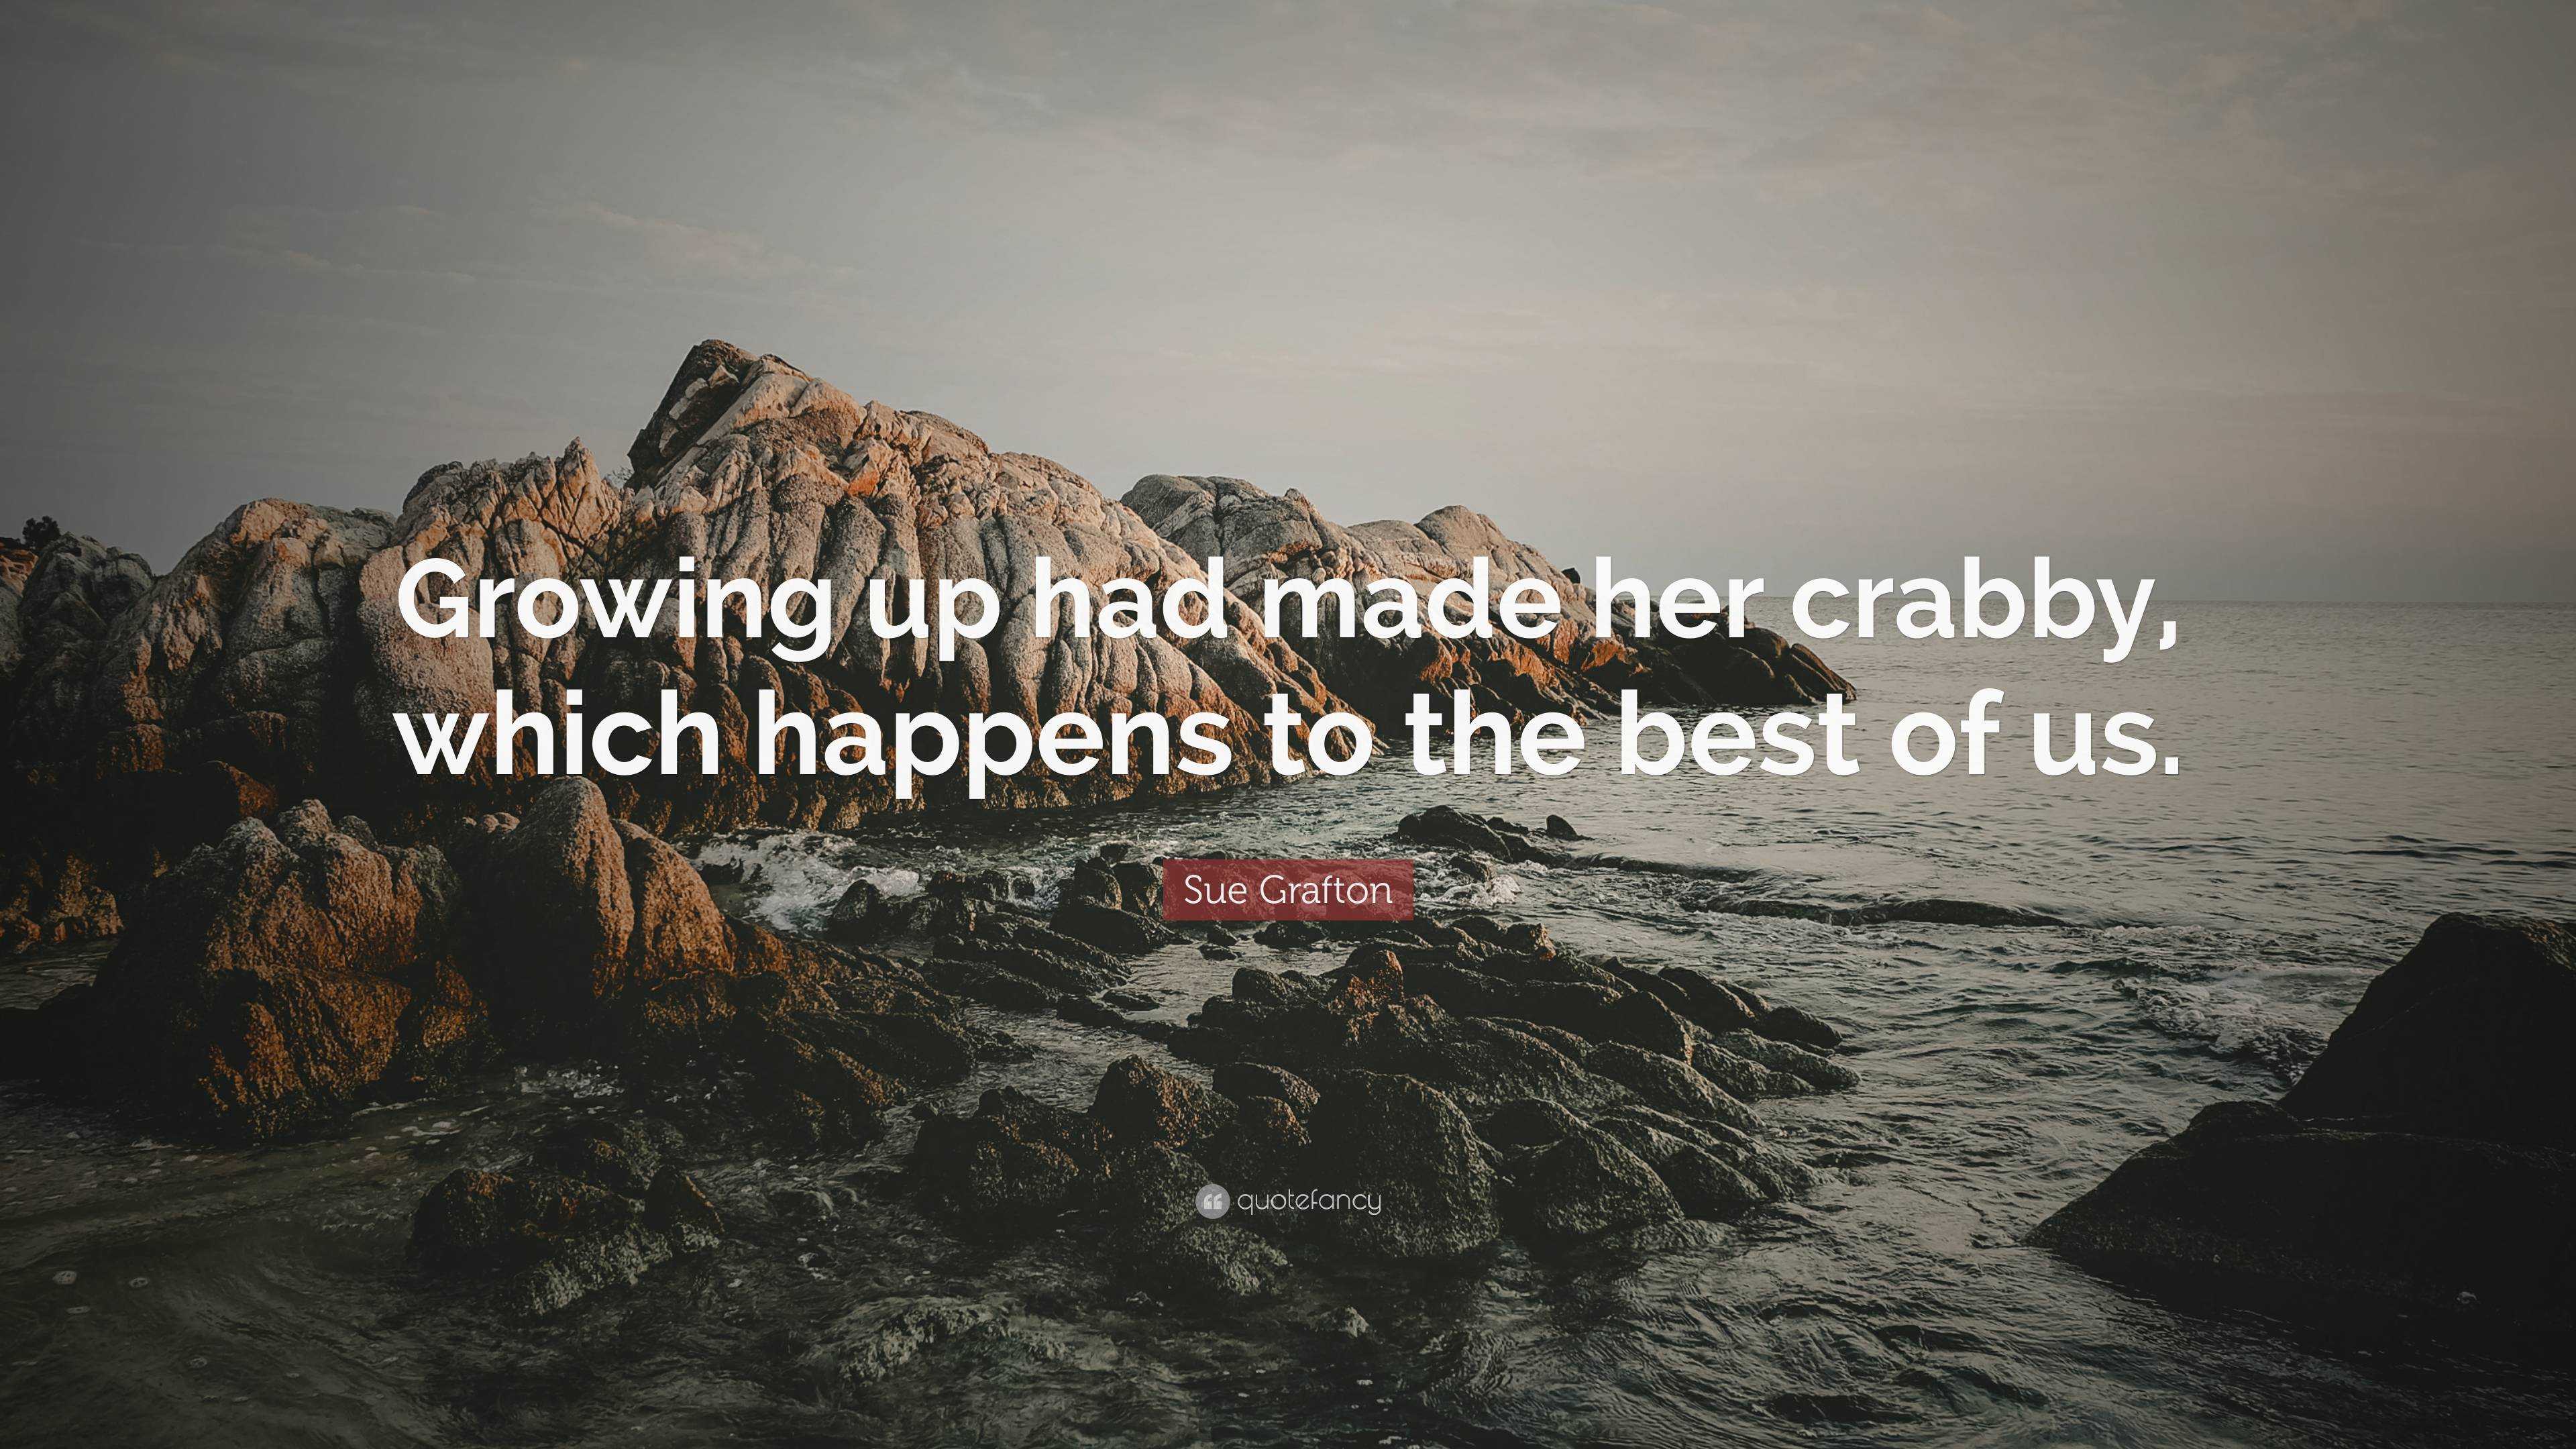 Sue Grafton Quote: “Growing up had made her crabby, which happens